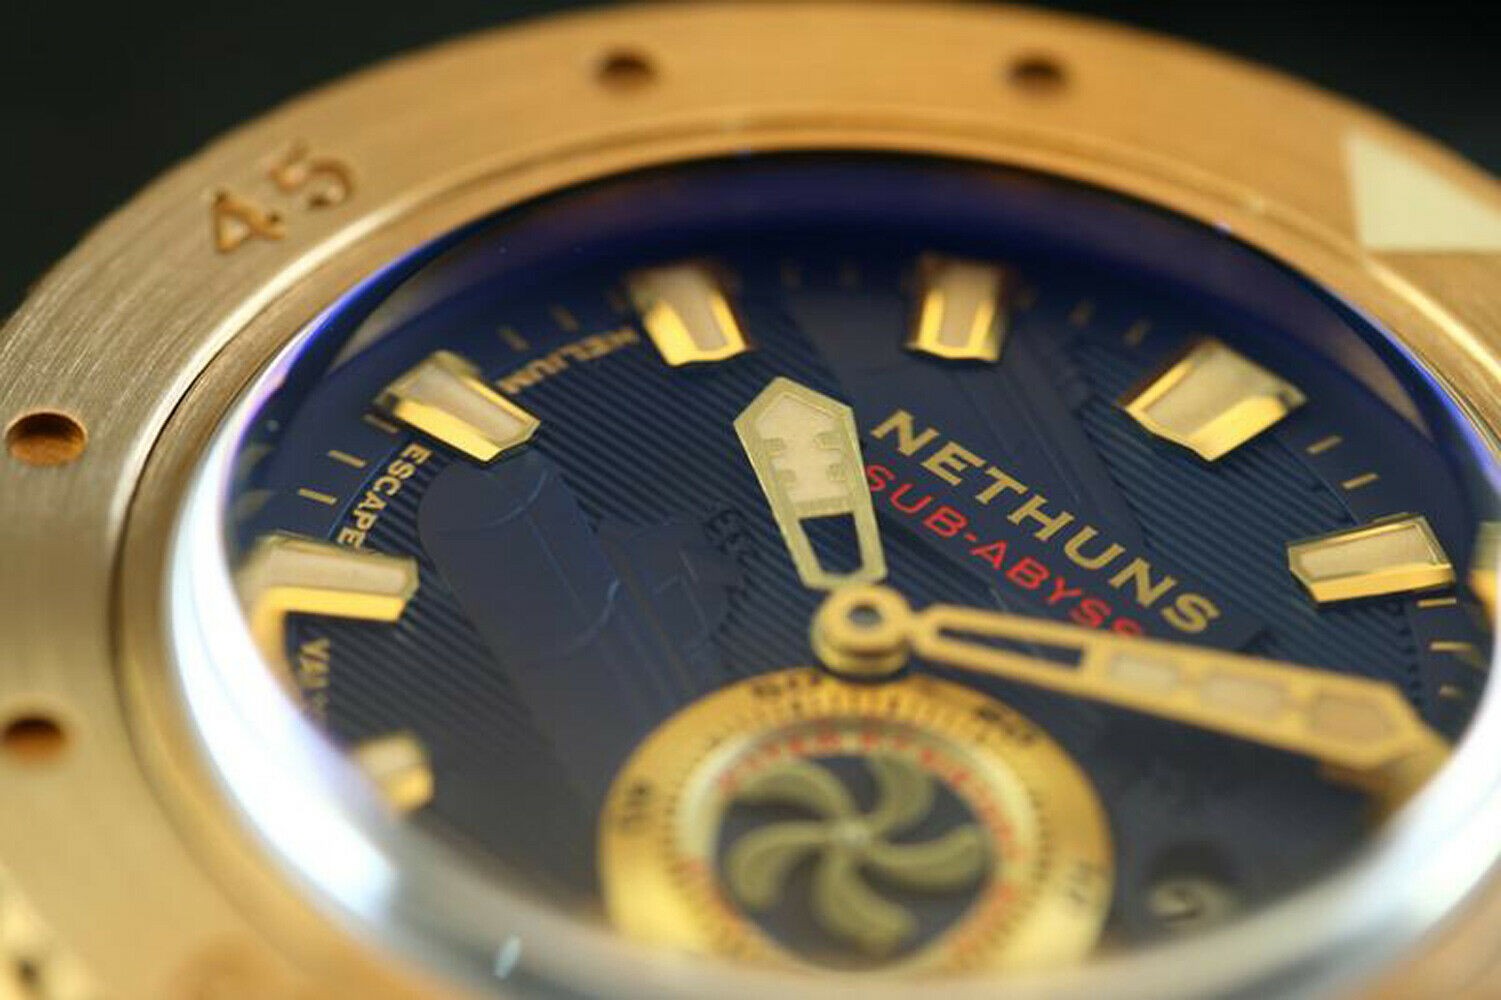 Nethuns Sub-Abyss Bronze Automatic Men's Diver Watch 45mm Blue Dial SAB302